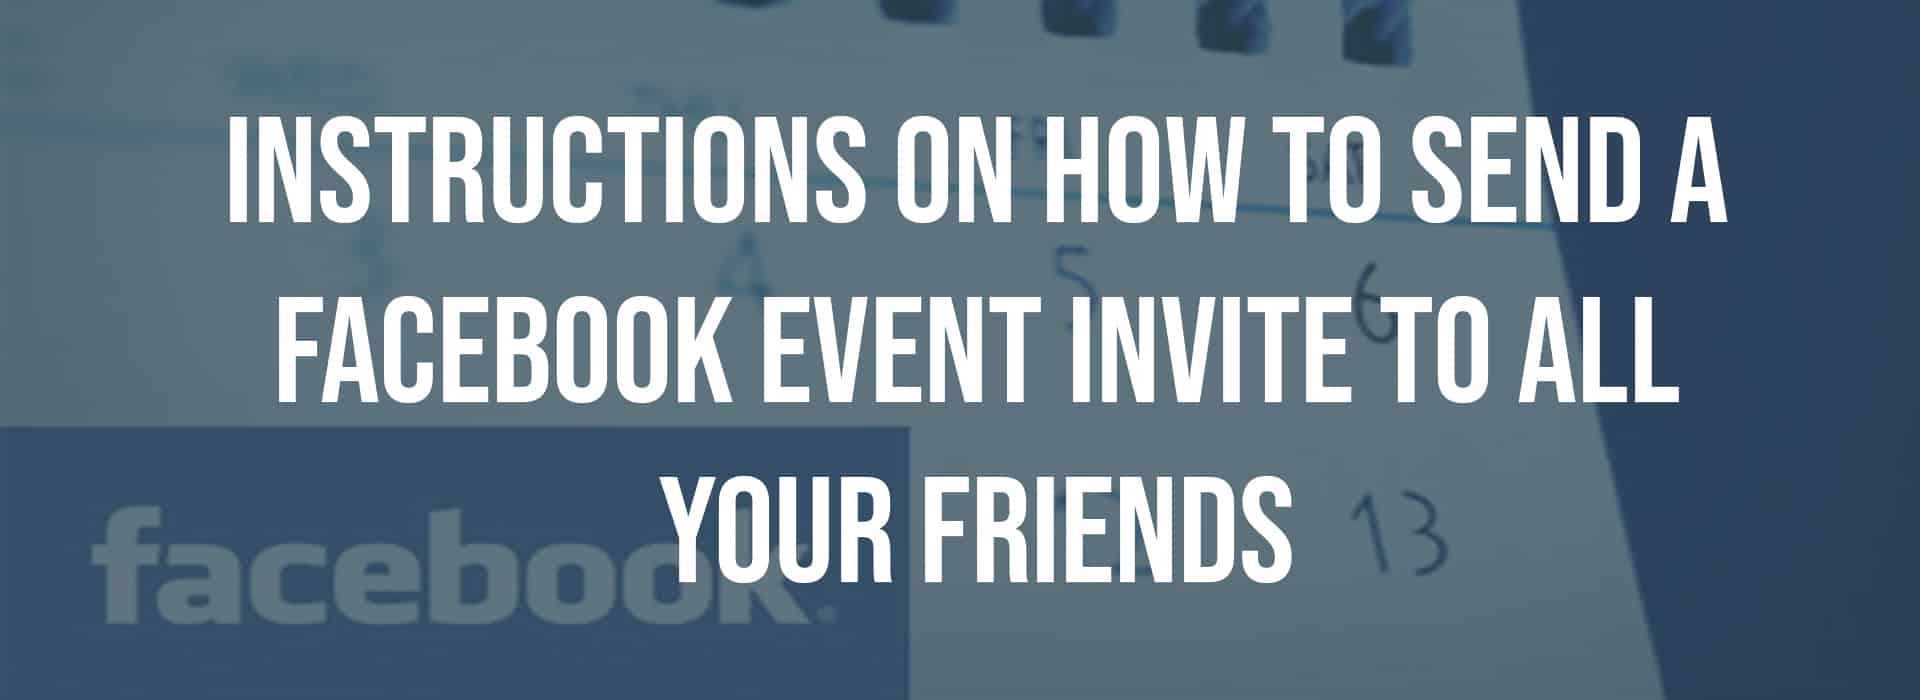 Instructions on How to Send a Facebook Event Invite to All Your Friends